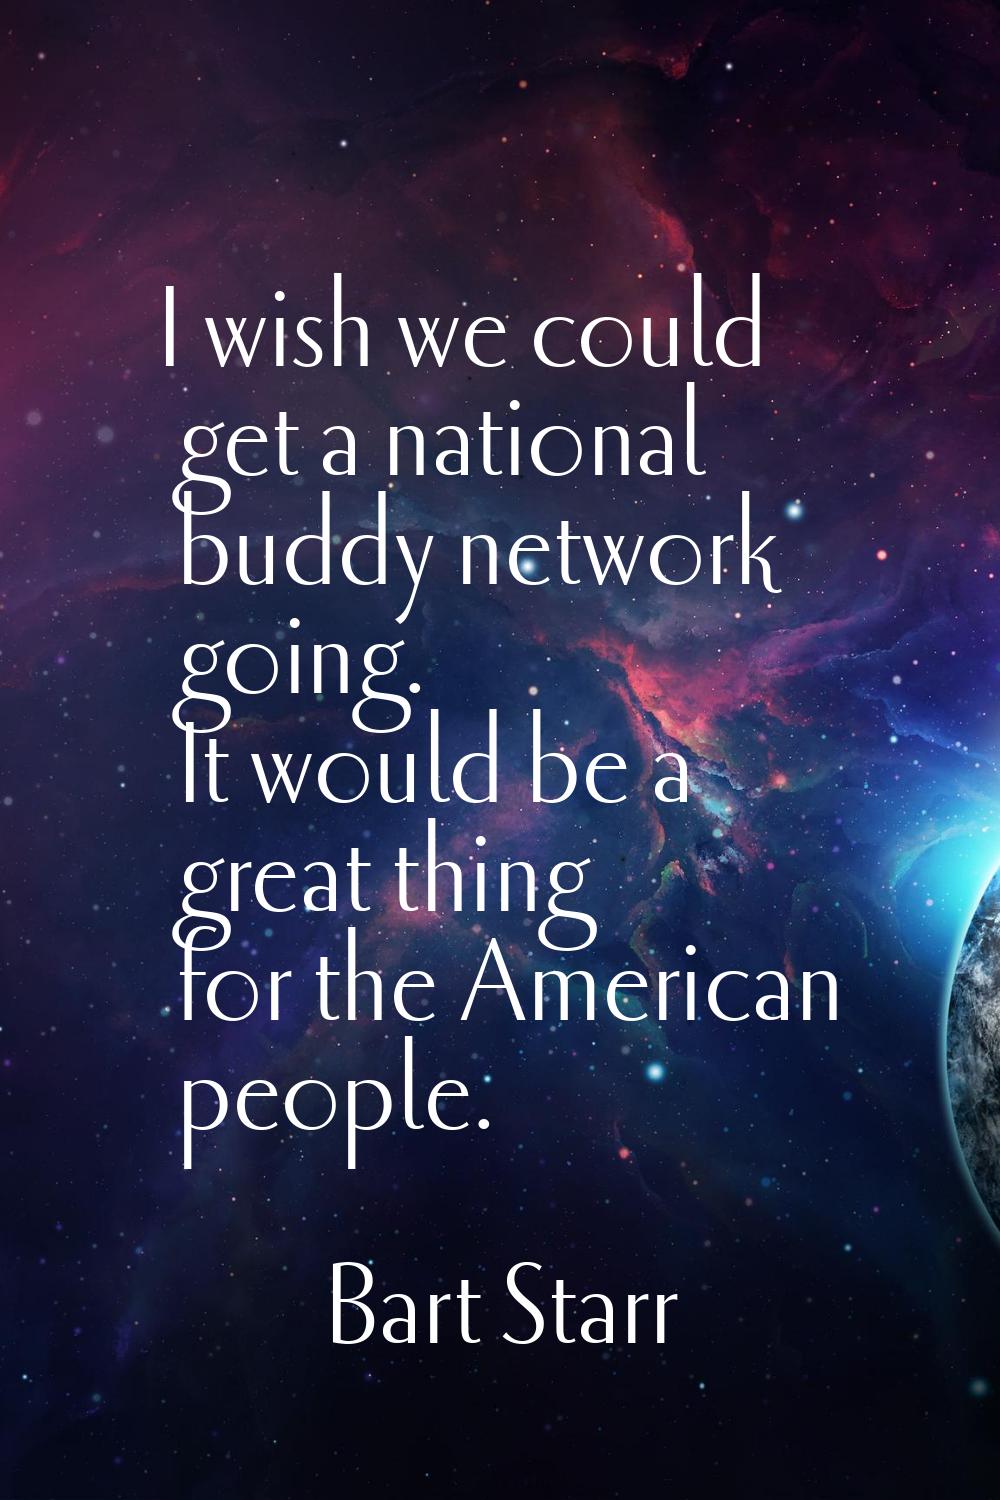 I wish we could get a national buddy network going. It would be a great thing for the American peop